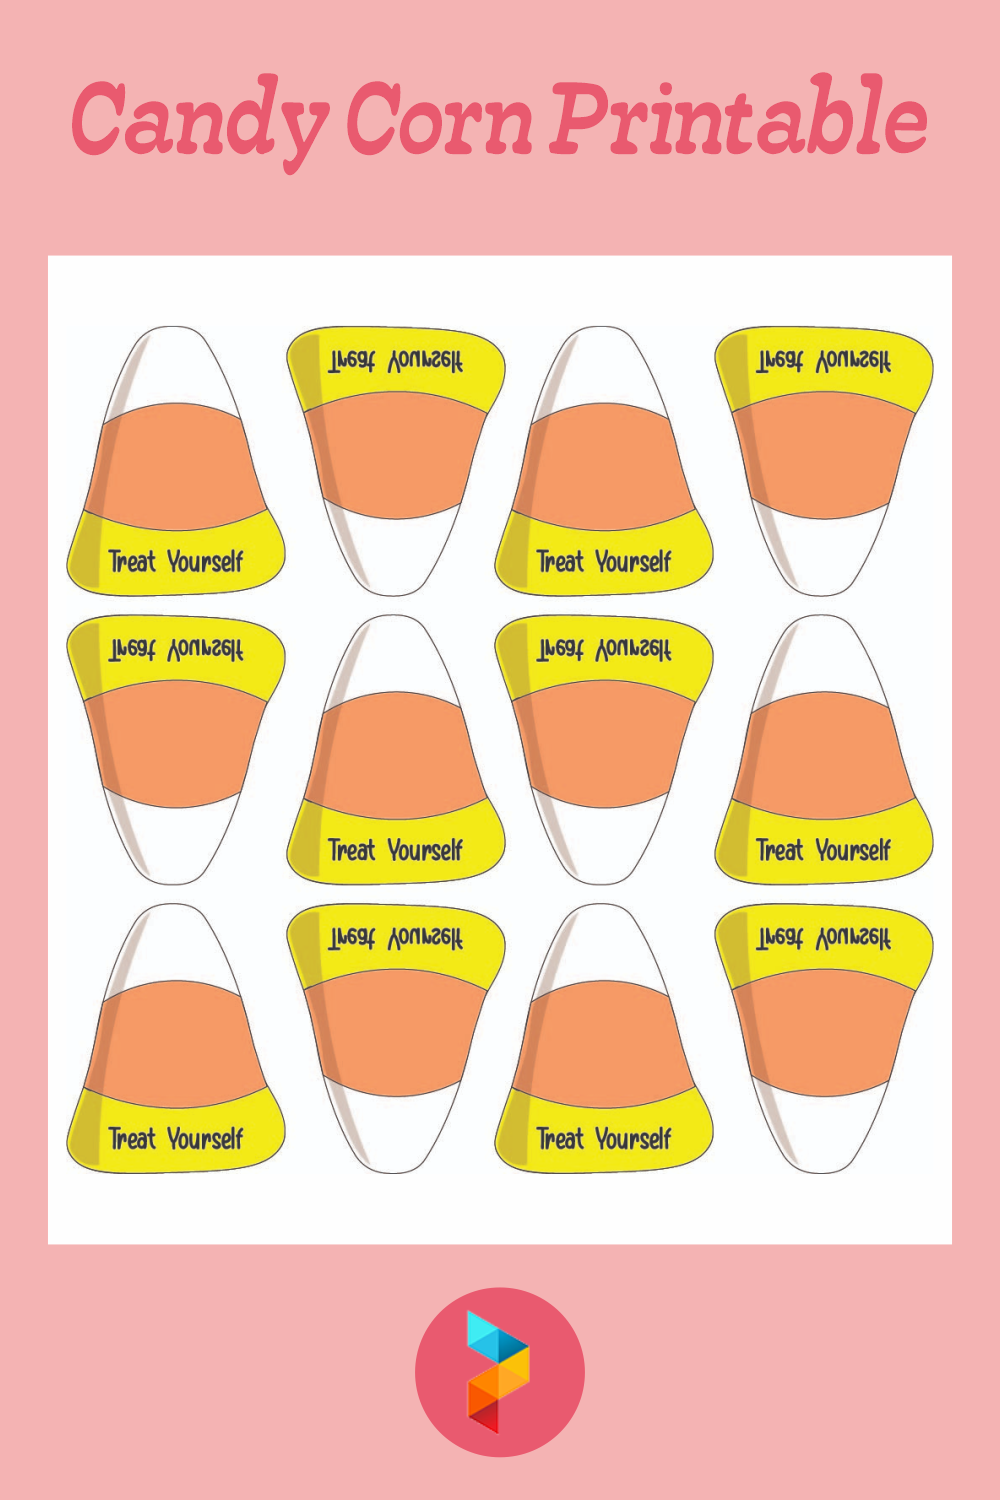 10 Best Candy Corn Printable PDF For Free At Printablee